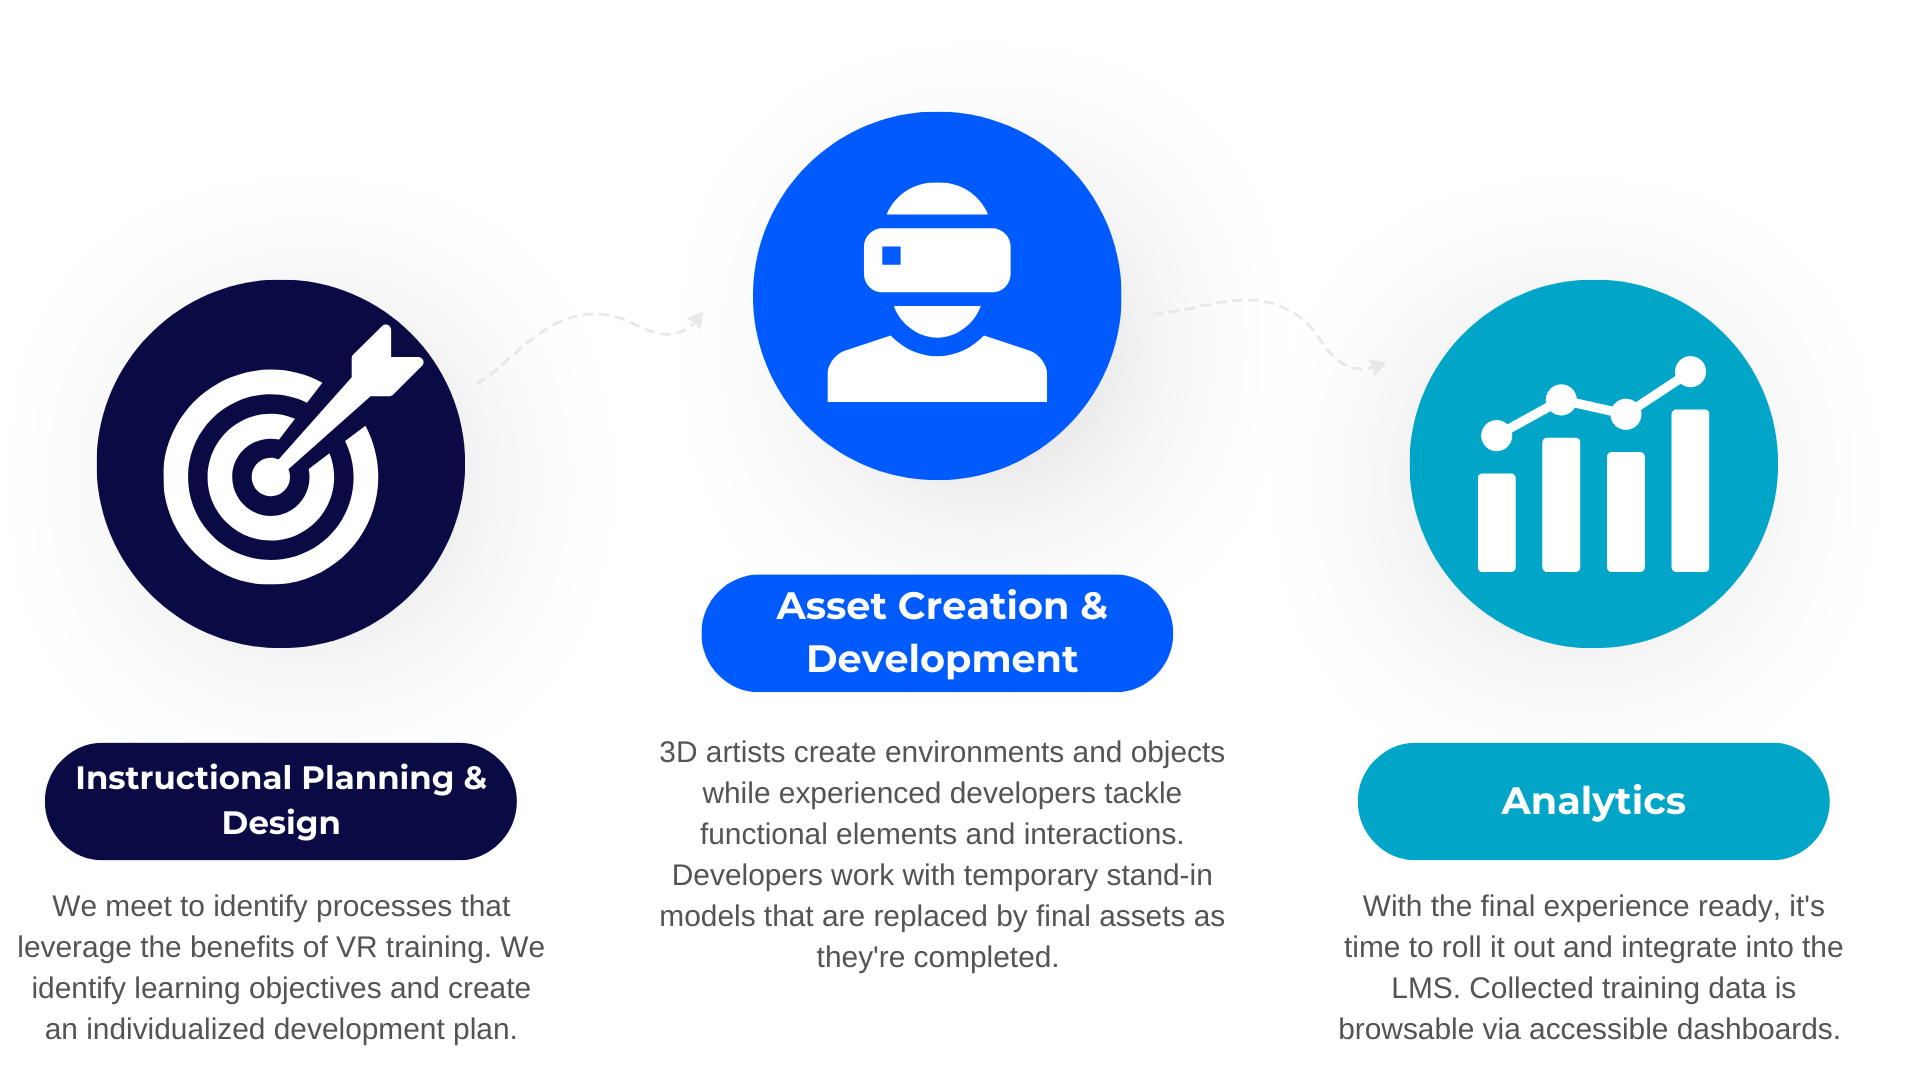 extended reality development process including planning, asset creation, and analytics